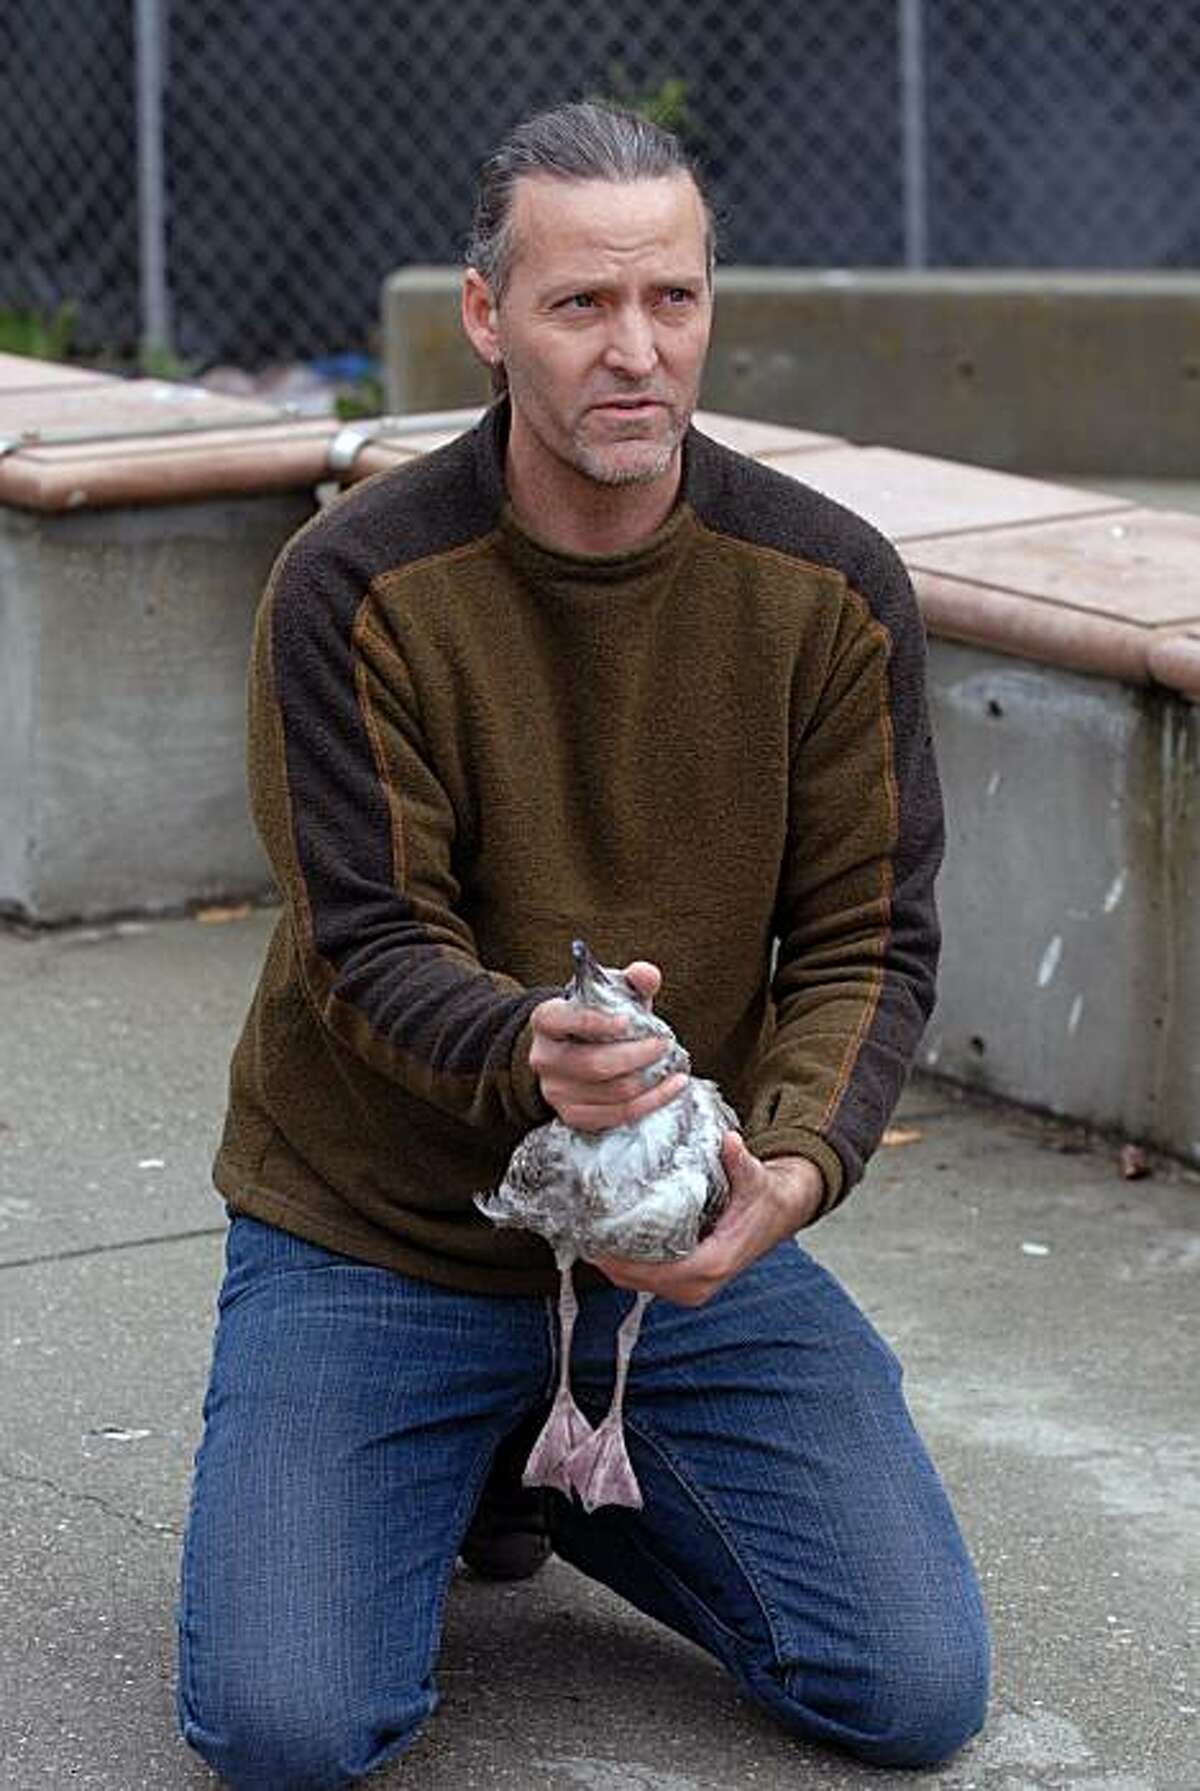 Mark Russell of International Bird Rescue Research Center (IBRRC) holds a juvenile gull after it had a beer can removed from its neck at San Francisco State University. Rescue teams from International Bird Rescue Research Center (IBRRC) and WildRescue captured the bird, removed the can and released the gull back to the wild Saturday, December 11, 2010.Photo by International Bird Rescue Center.